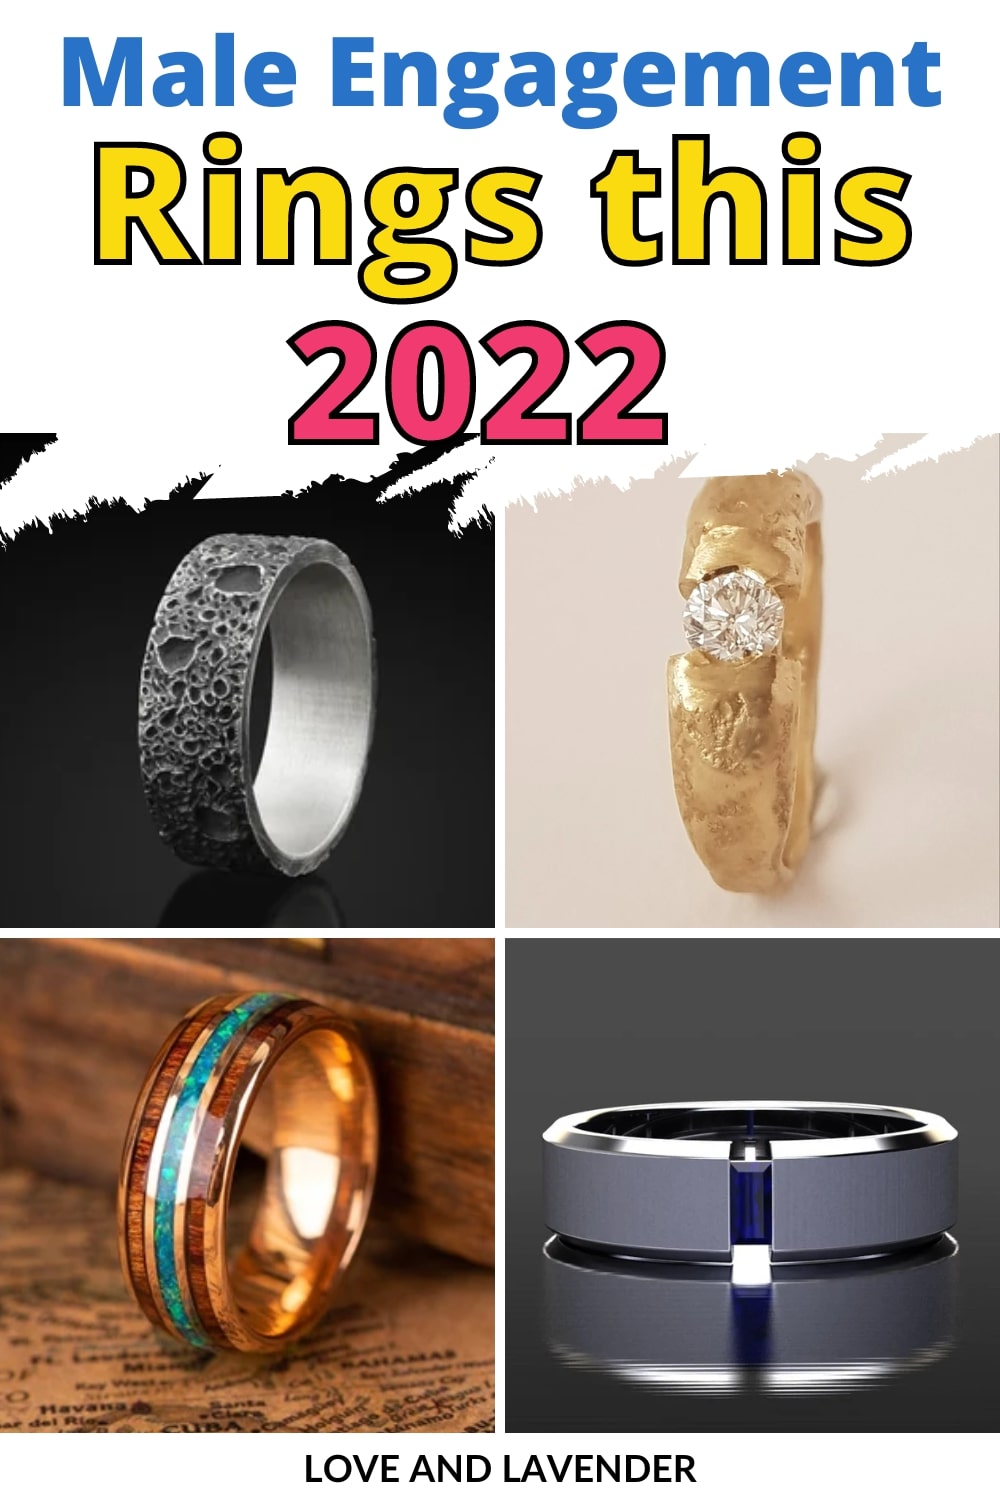 Looking for the perfect engagement ring for the special man in your life? Check out our latest roundup of the best rings for men. Whether you're looking for something traditional or unique, we've got you covered!﻿